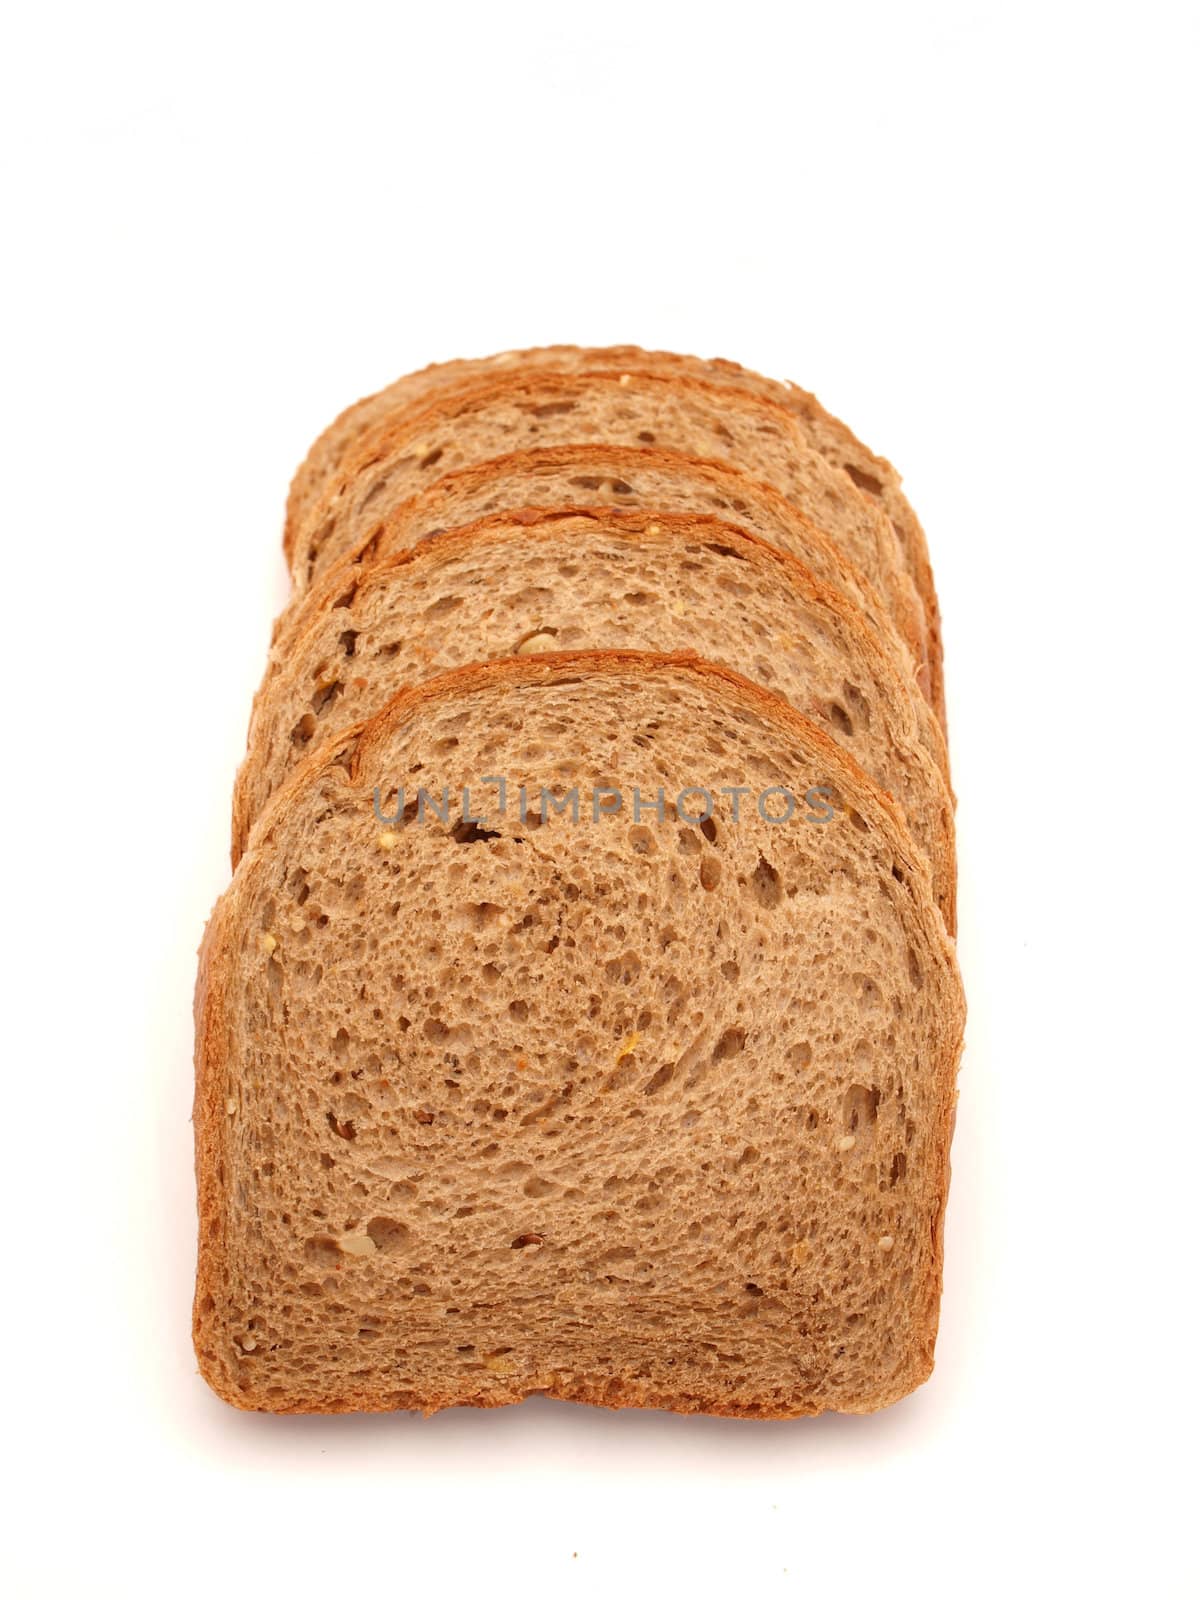 Bread on a white background            